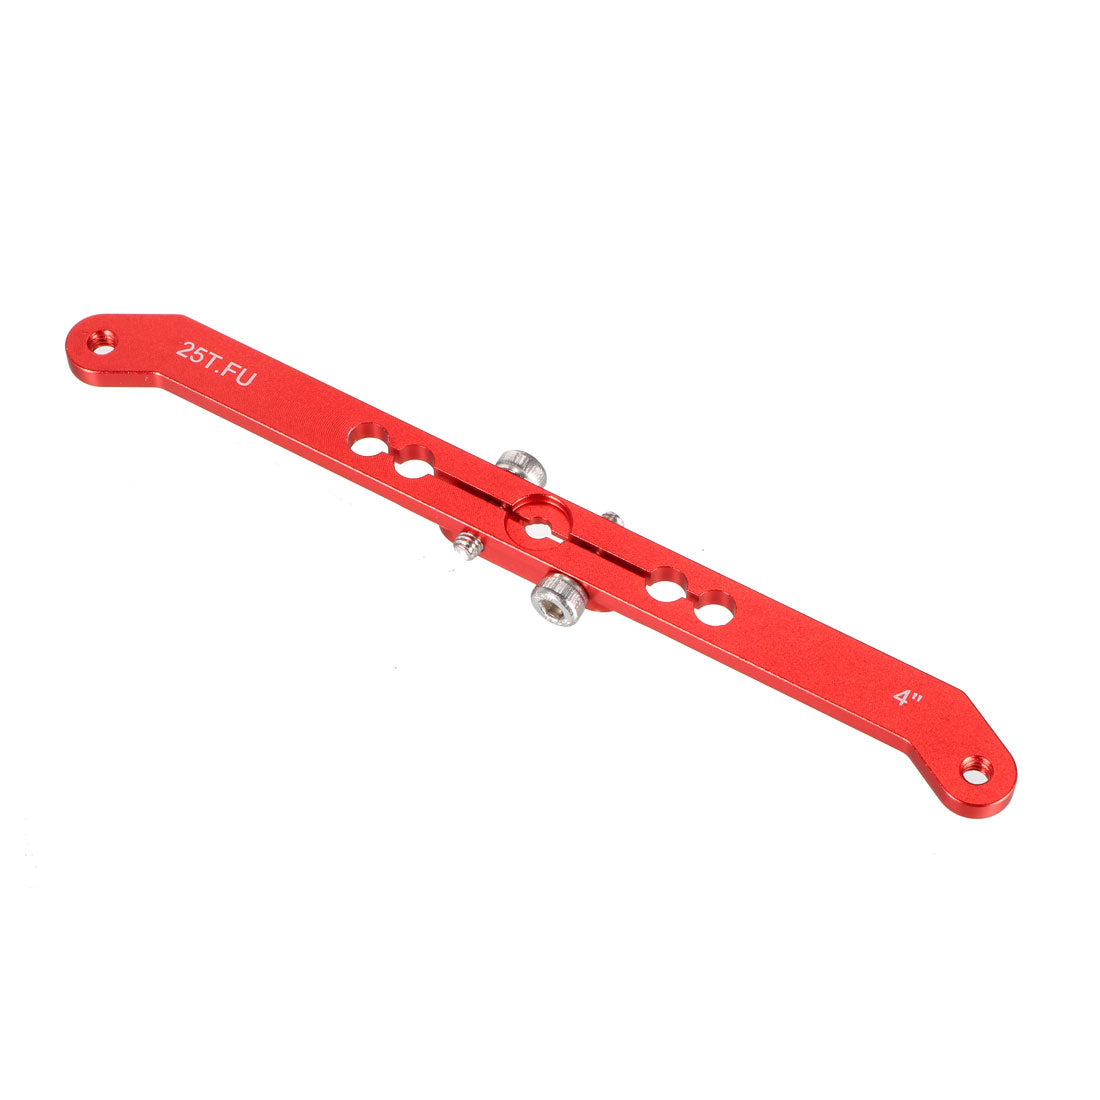 uxcell Uxcell Aluminum Servo Arms Double Arm 25T 4-40# Thread Red, for 4 Inch Futaba